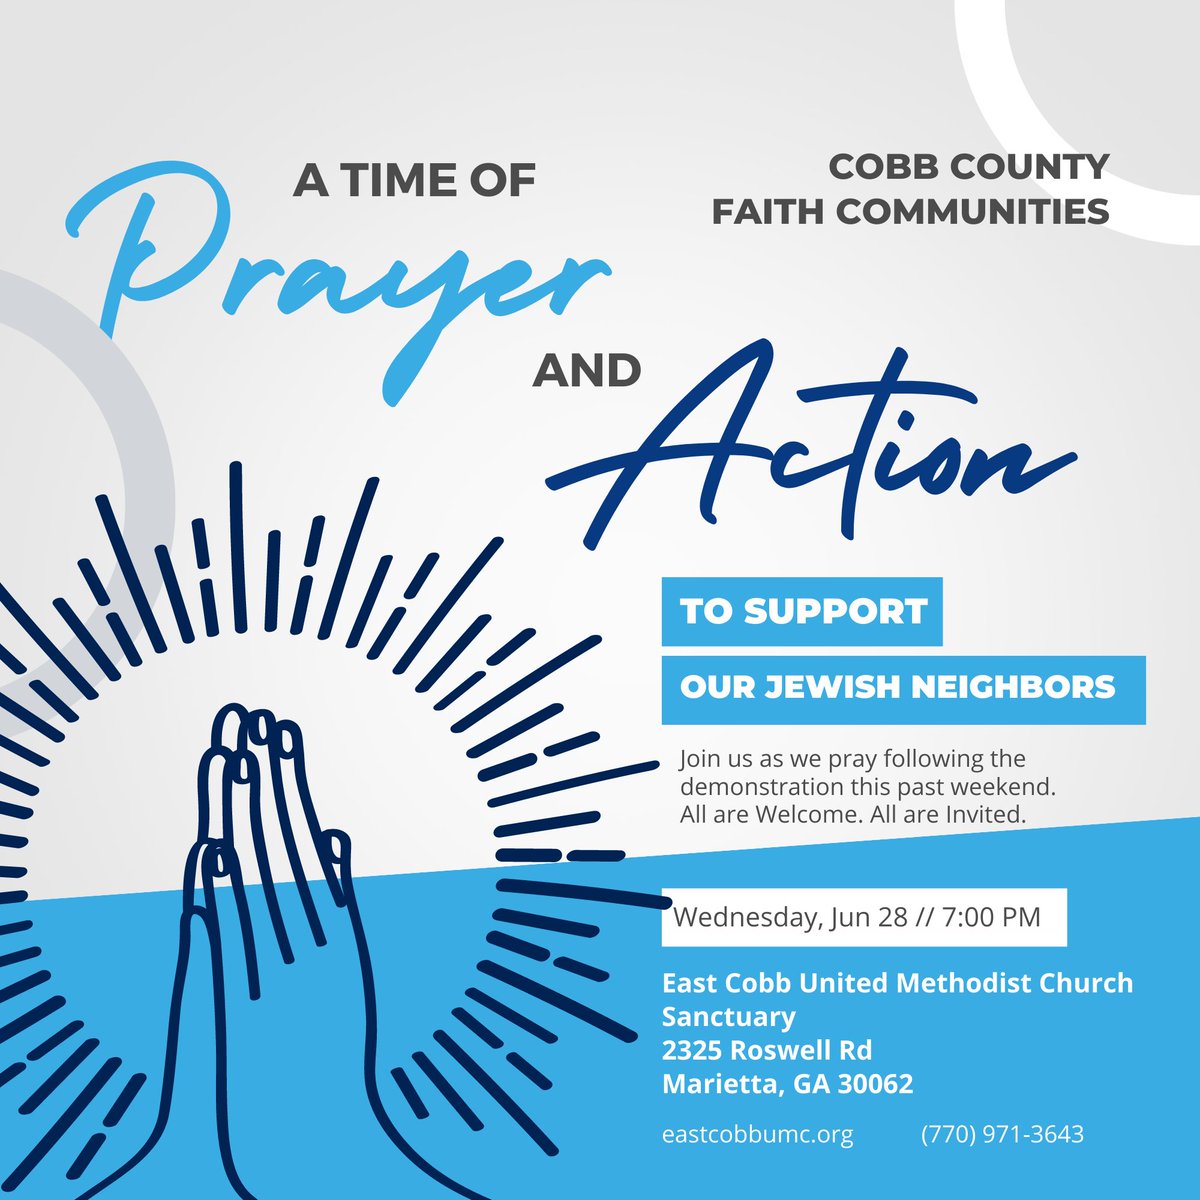 Please join the Cobb County Faith Communities tomorrow at 7pm to pray, learn how to combat hate and support your Jewish neighbors! #gapol #HB30